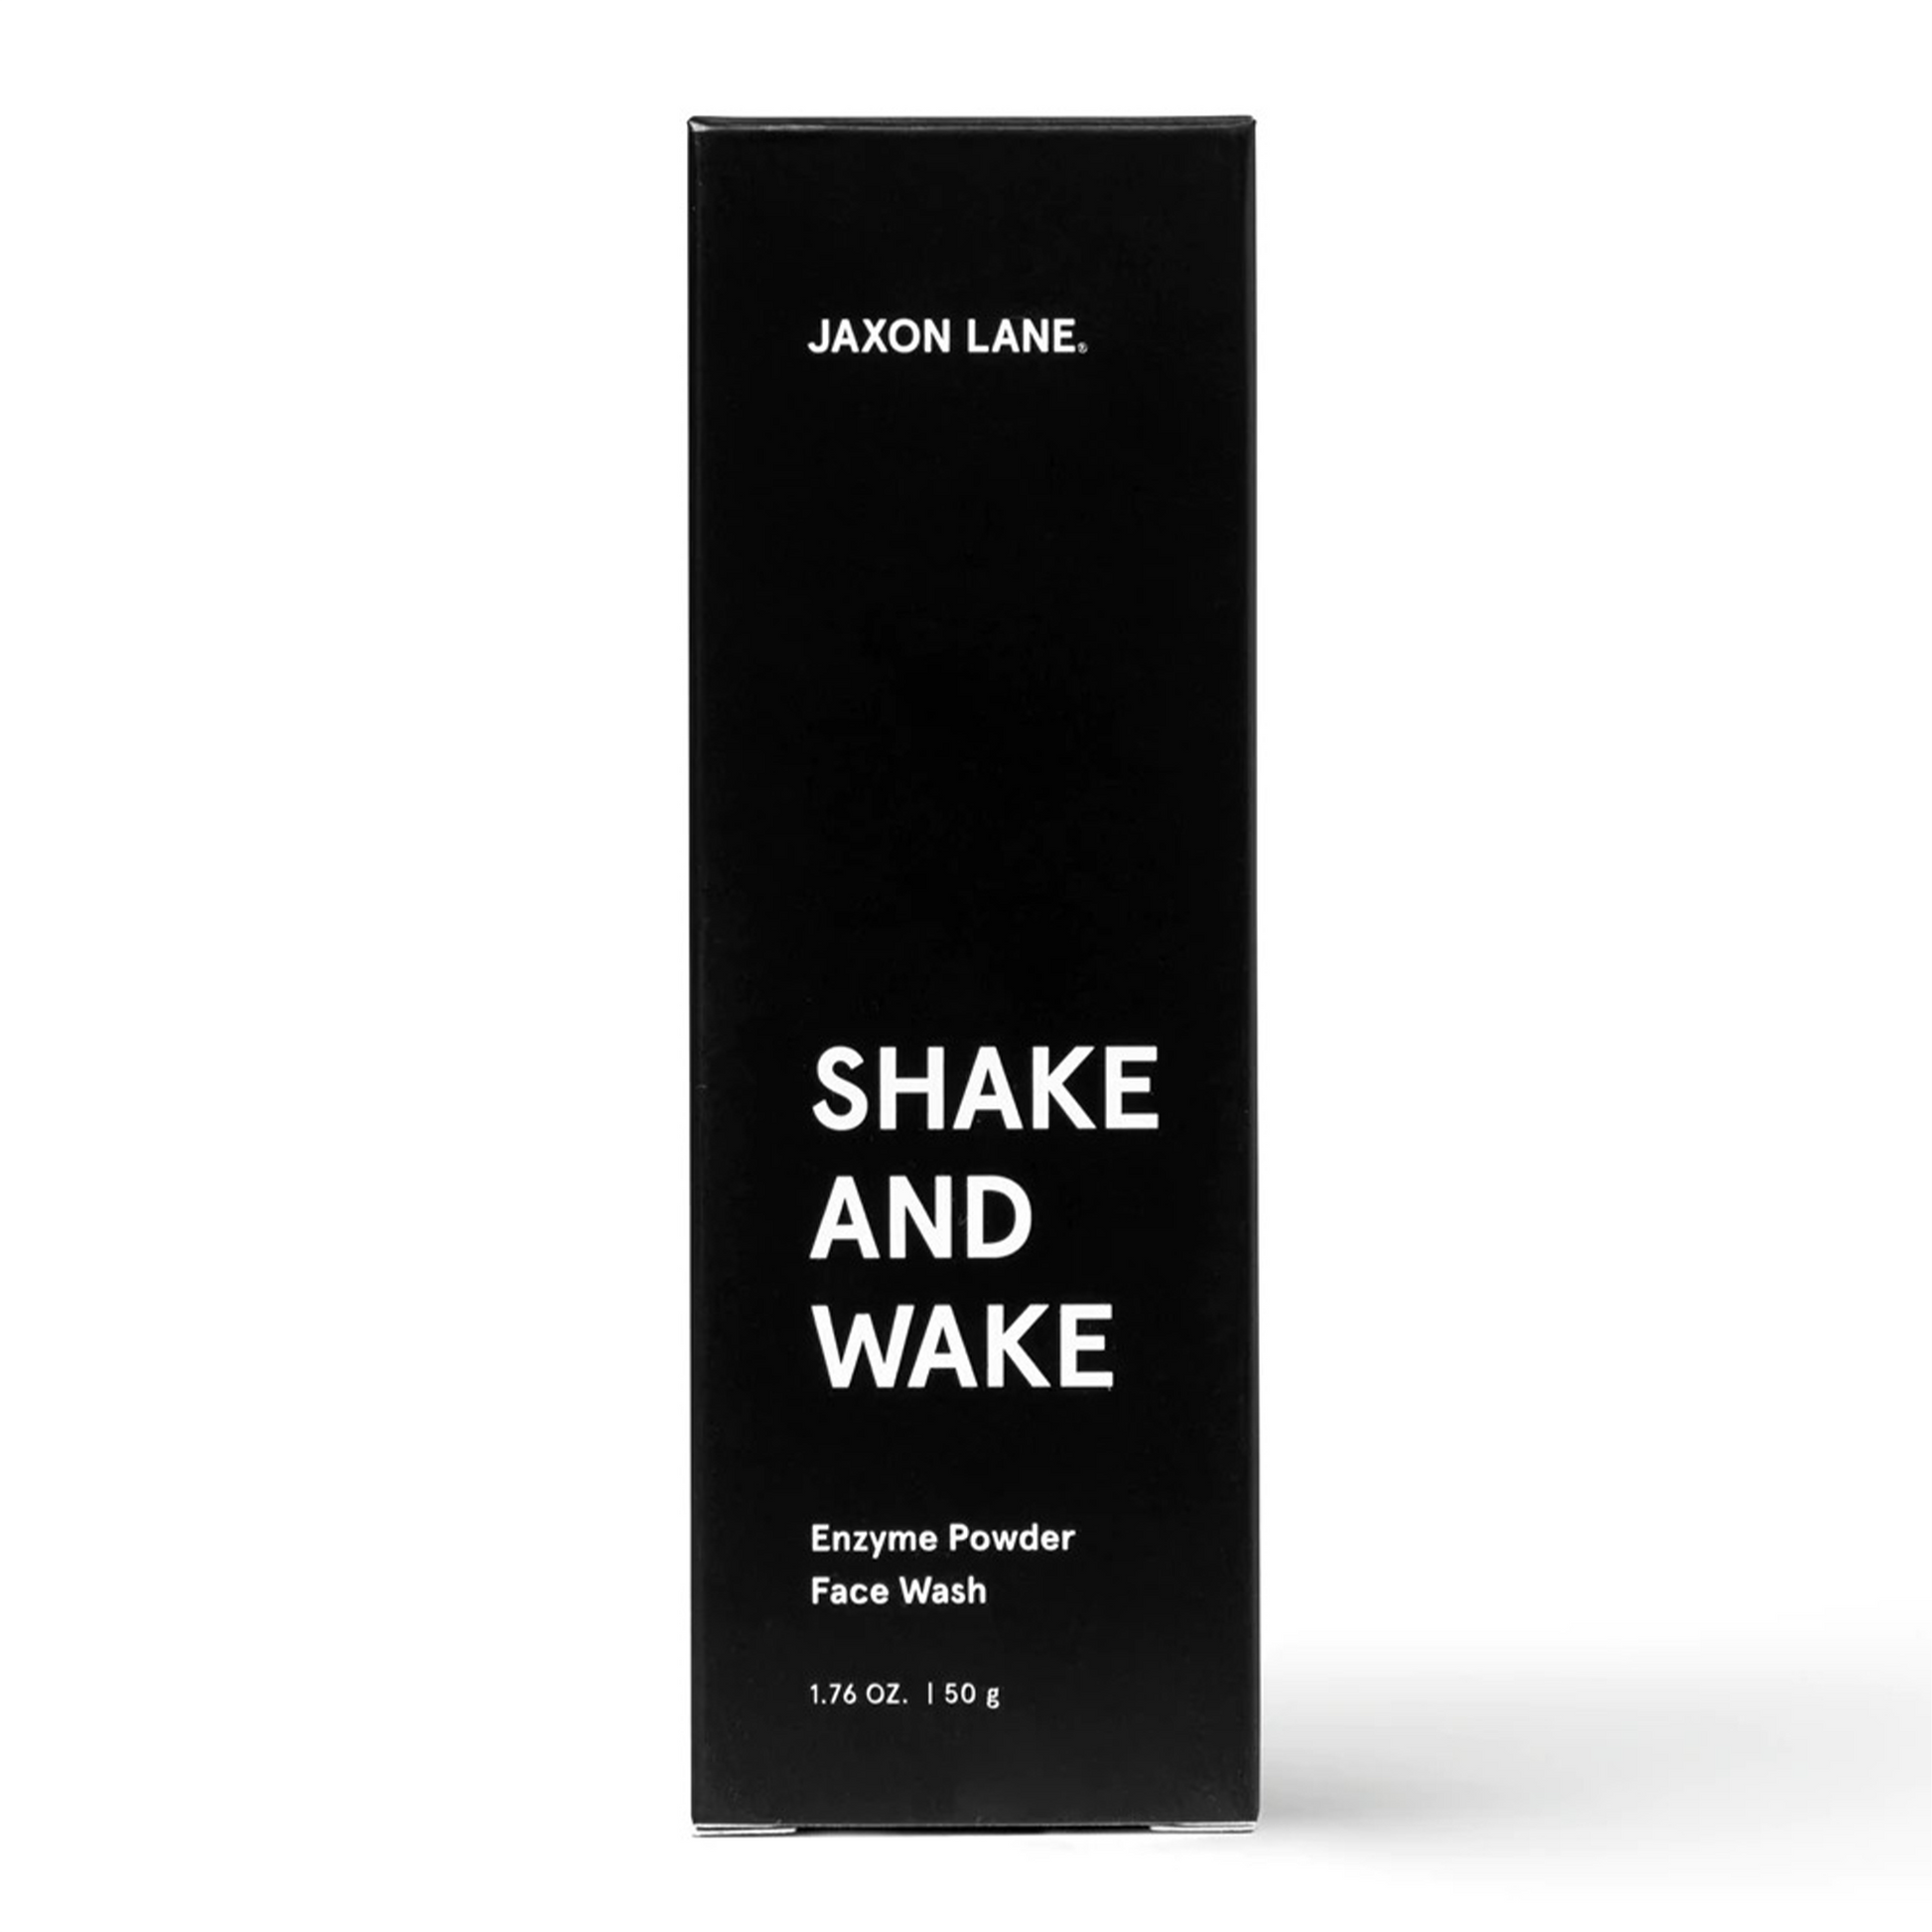 Jaxon Lane Shake And Wake Exfoliating Enzyme Powder Cleanser: Activated with water, our award winning face wash lathers into a silky foam that gently cleans and exfoliates for smooth, soft, healthy skin.